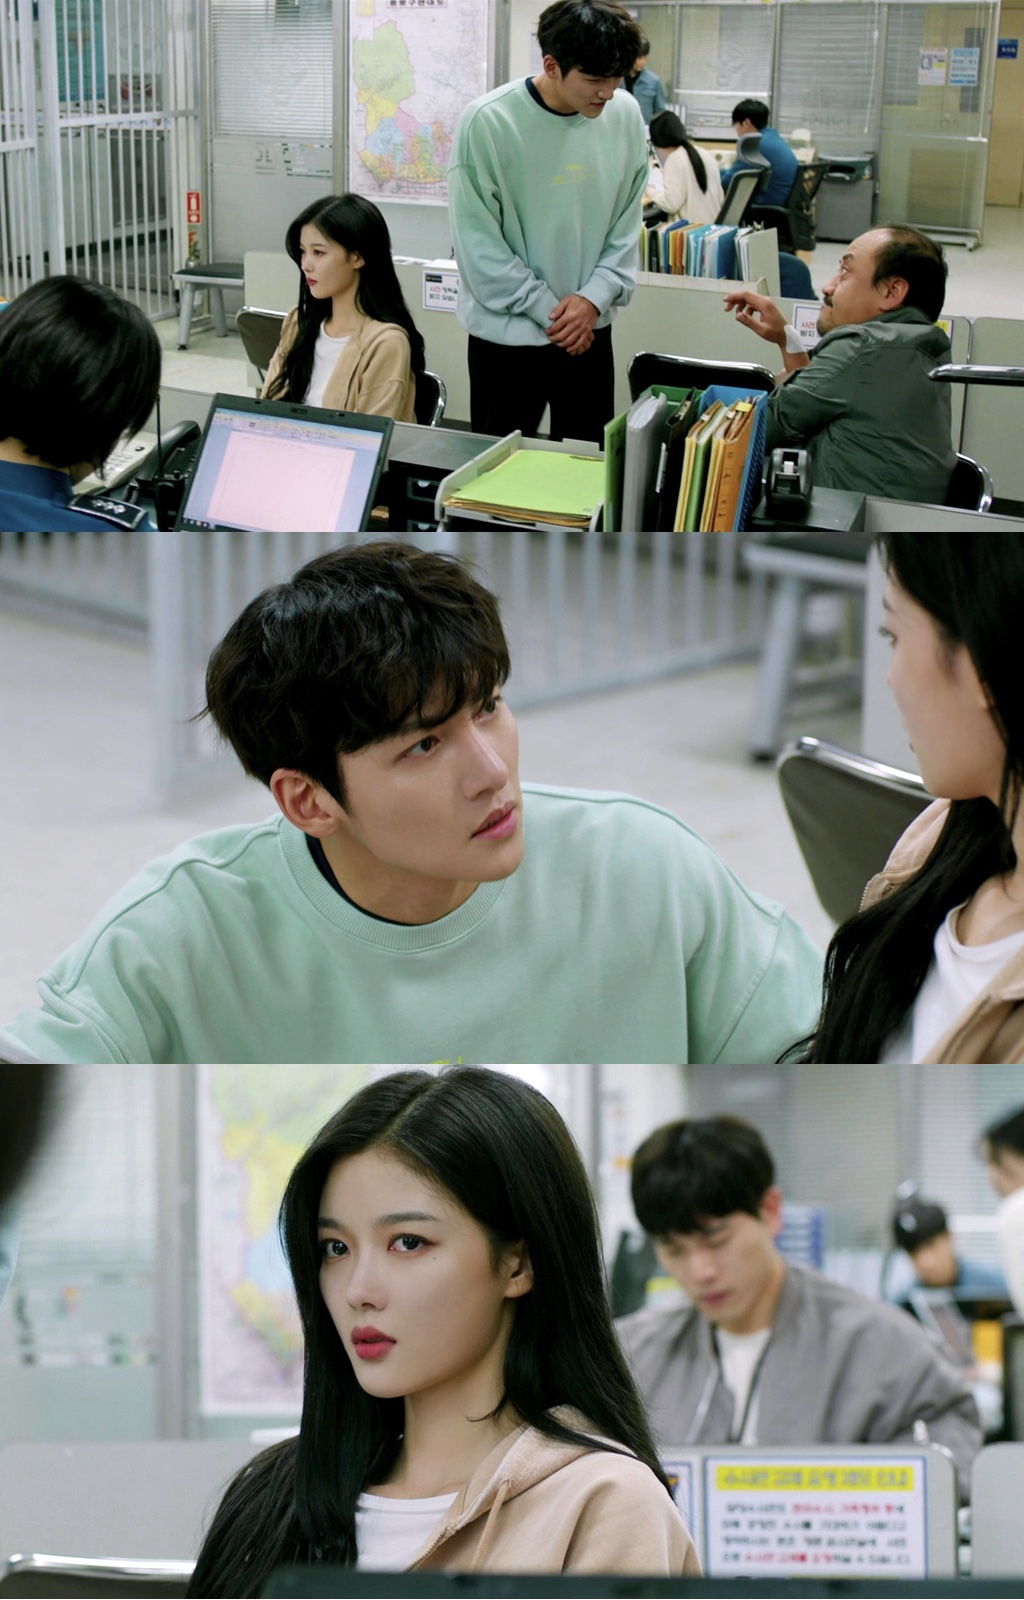 Why did Ji Chang-wook and Kim Yoo-jung come to Police?SBSs Lamar Jackson Convenience store star (playwright Son Geun-joo/director Lee Myung-woo/producer Taewon Entertainment) depicts the manager Choi Dae-heon (Ji Chang-wook) and Kim Yoo-jung, who are approaching through various incidents in the Convenience store. ...The star is struggling to become a formal alba even in the old days of Choi Dae-heon.However, in the last three episodes, Choi Dae-heon misunderstood the star.It was seen by Jeong Sae-Sun and GFriend Yoo Yeon-ju (Han Seon-hwa) having a scuffle.The star was the one who saved the flexible liquor that was being suffered by the Yangchi, but Choi Dae-heon, who did not know it, Misunderstood the star, and the scene where the three people faced it, amplified the curiosity for future development.In the meantime, the production team of Convenience store Morning Star released a serious atmosphere that Choi Dae-heon and Jung Sae-sung have never seen before, ahead of the 4th broadcast today (27th).It was the capture of the two people together in Police.The star in the photo is being investigated by Police. The image of the star with red eyes as if it were unfair causes the sadness.Next to him, Choi Dae-heon is figuring out what happened.Choi Dae-heon, who has always been like a bullshit, bursts into anger that he rarely sees in Police on this day.The star makes me wonder why I was under police investigation, what Choi Dae-heon would have been angry about.Choi Dae-heon had previously suspected the past of the star, and tried to cut it off as a temporary alba.The case with GFriend Flexible was added to this, and eventually he decided to cut off the star.Choi Dae-heon is really paying attention to whether it will be firing the star, how the meeting at Police will affect these relationships, and the attention of enthusiastic viewers.Meanwhile, the fourth episode of SBSs Lamar Jacksons Convenience store Morning Star will air today (27th) at 10 p.m.iMBC  Photo SBS